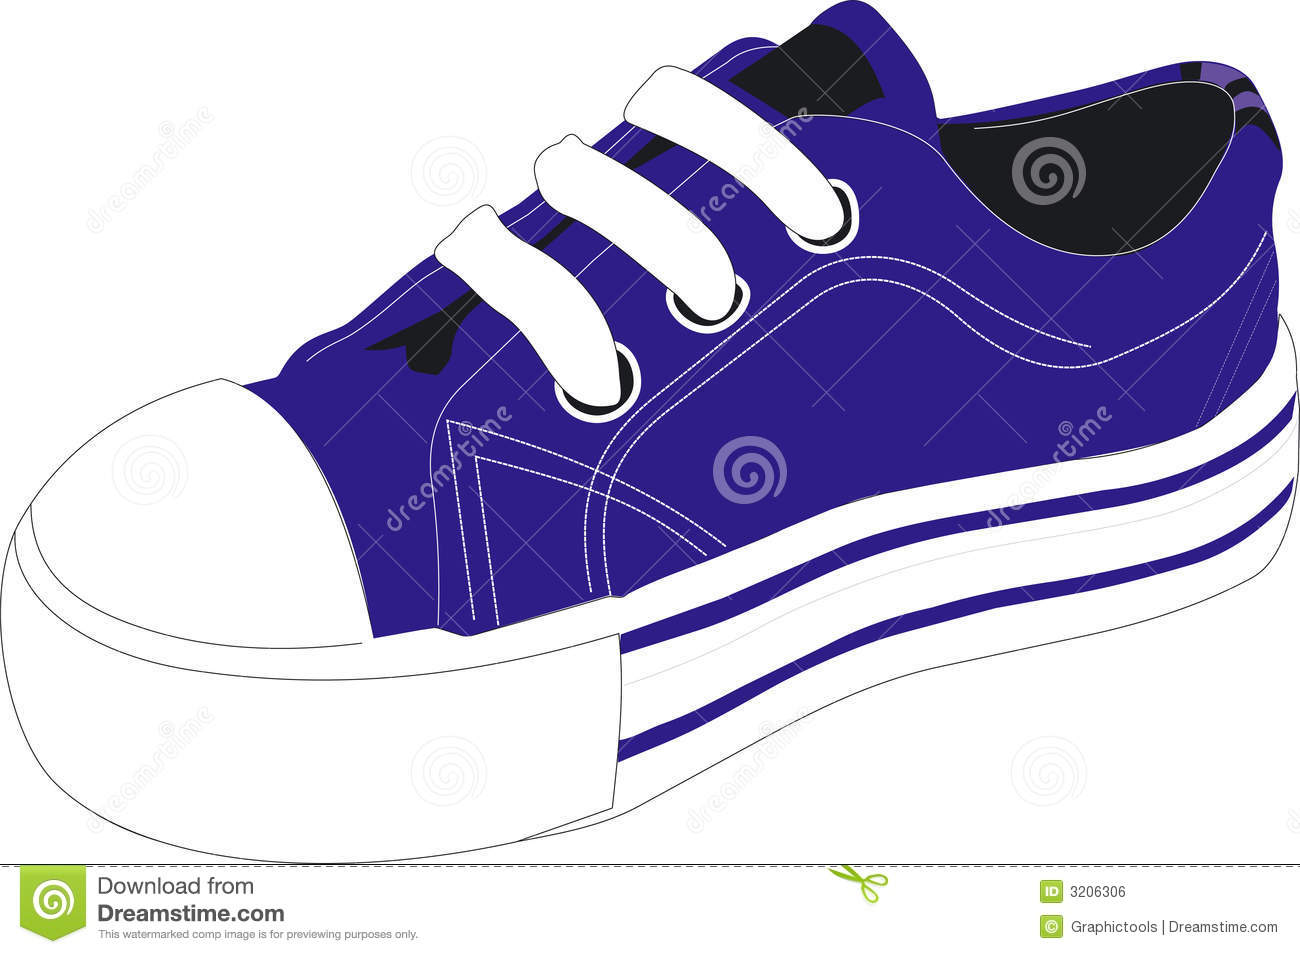 Shoe clipart #4, Download drawings